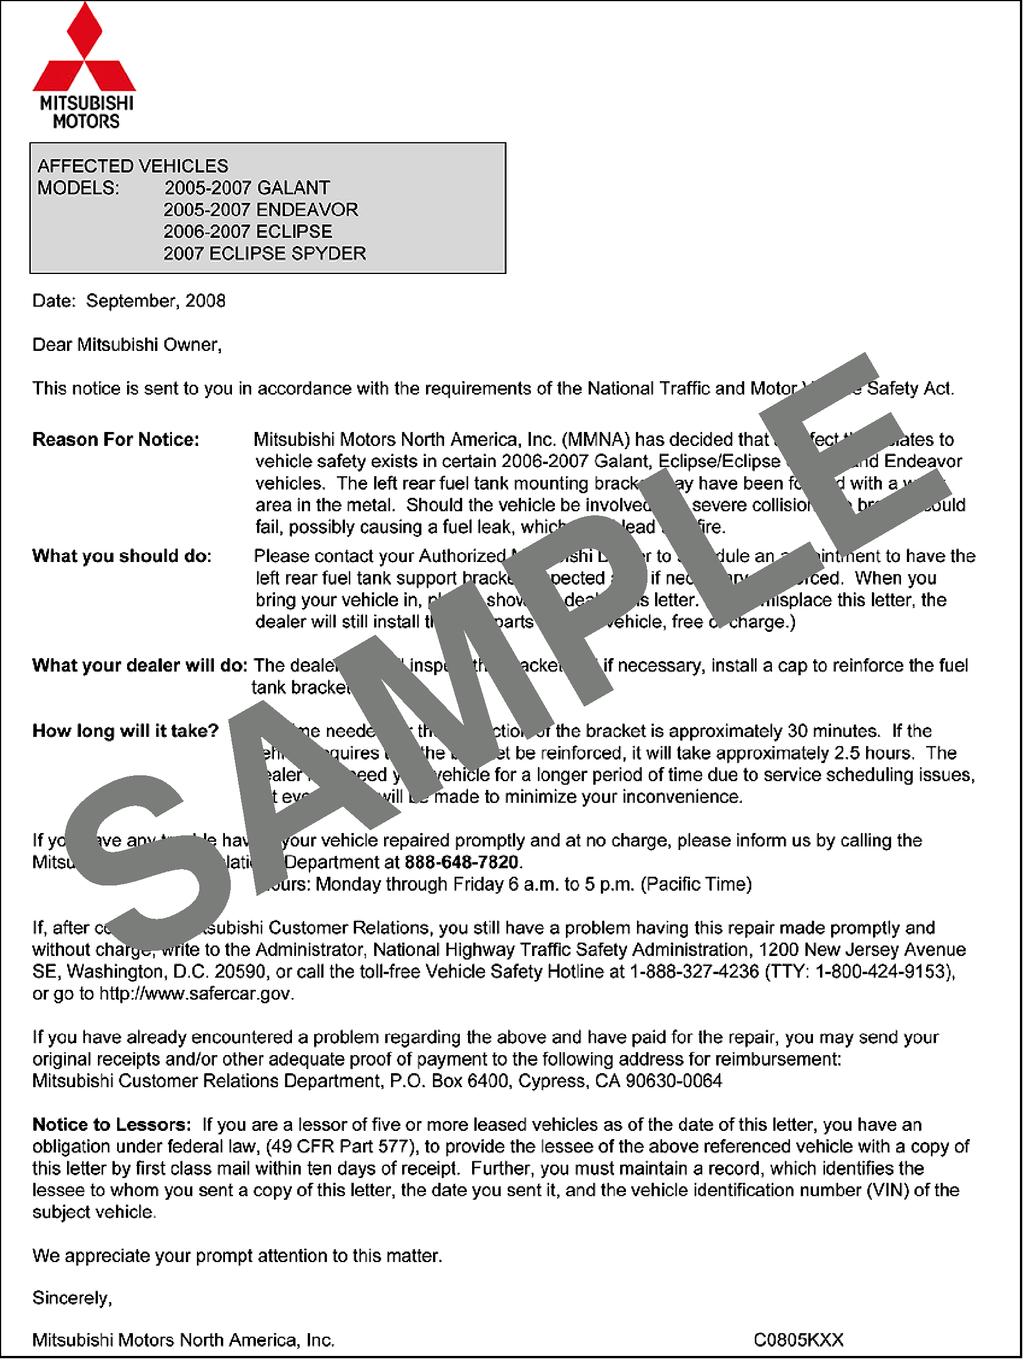 Copyright 2008, Mitsubishi Motors North America, Inc. The information contained in this bulletin is subject to change.